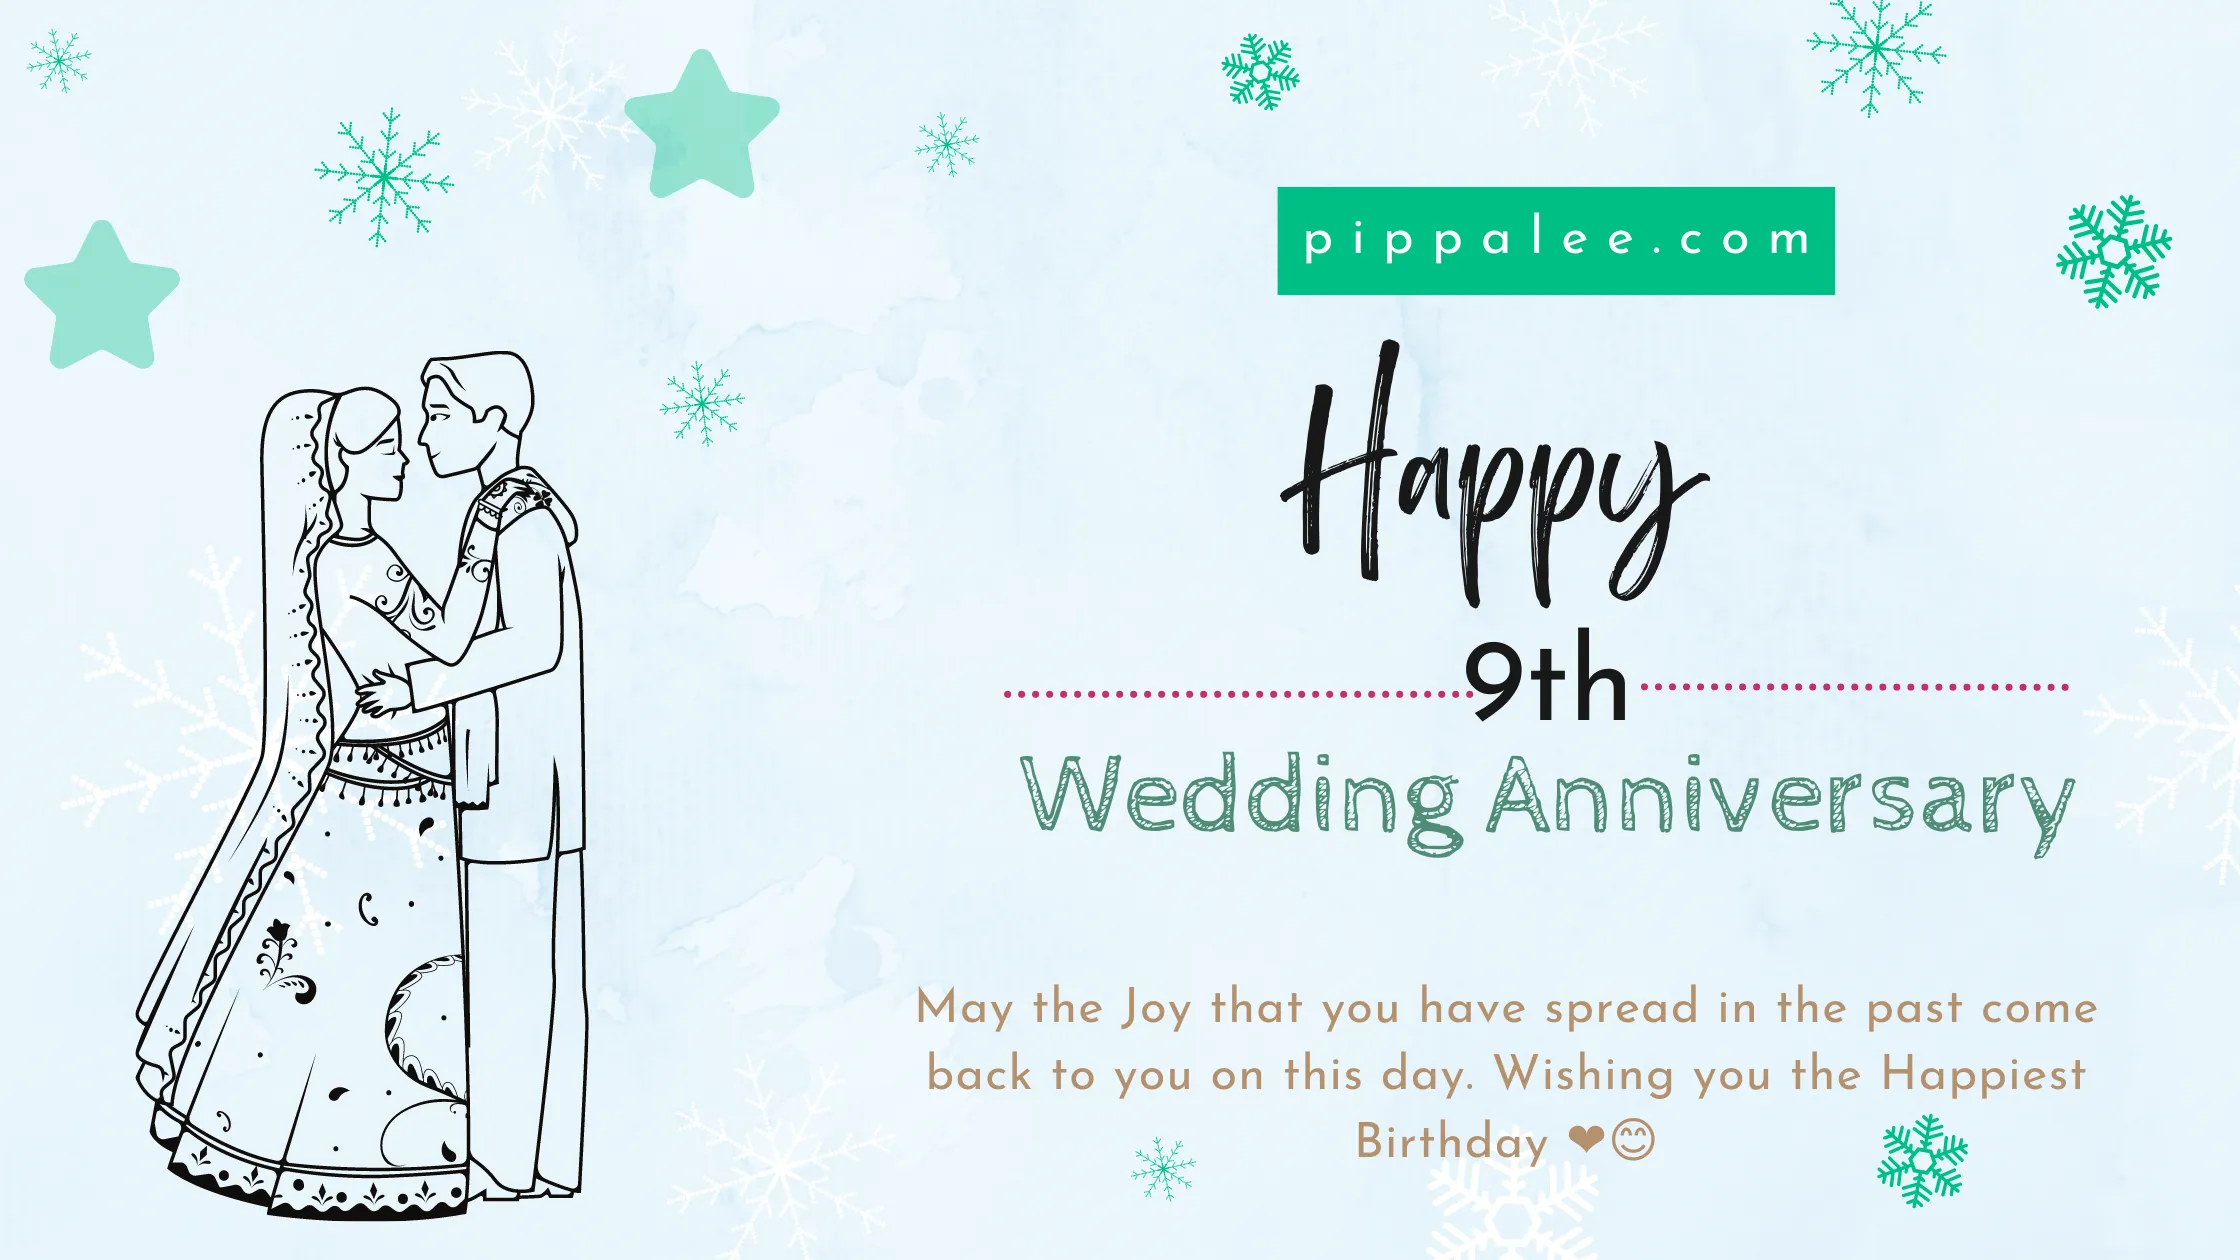 9th Wedding Anniversary - Wishes & Messages